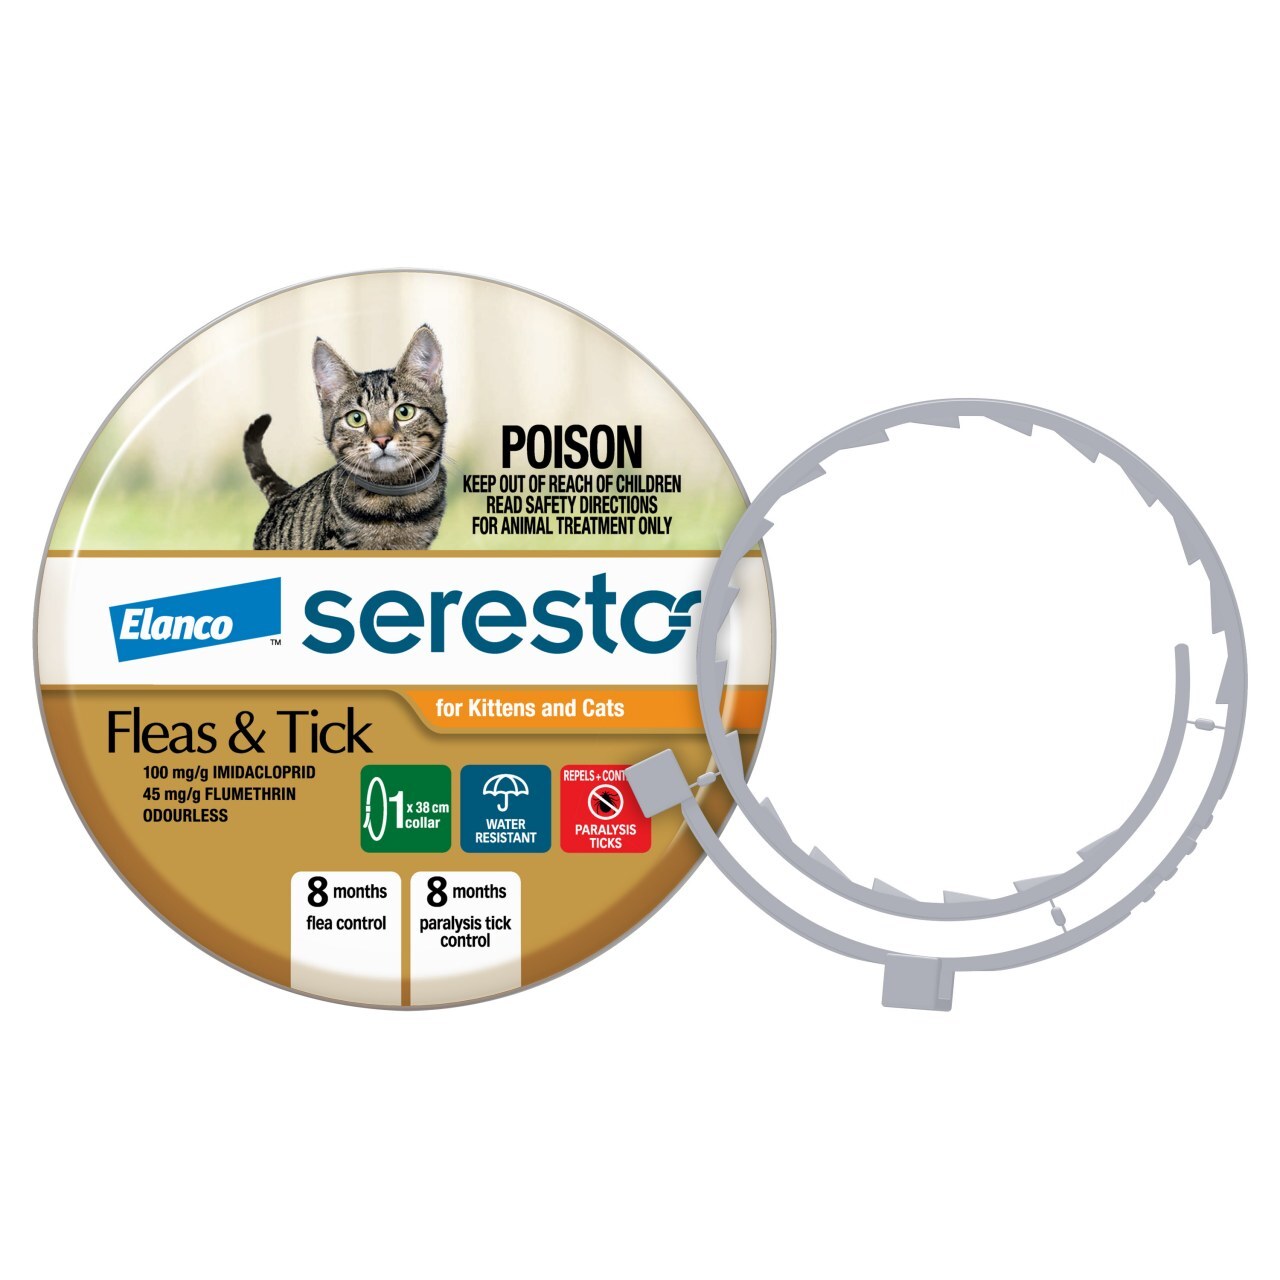 Seresto Flea Collar for Cats and Kittens - Lasts up to 8 Months image 2